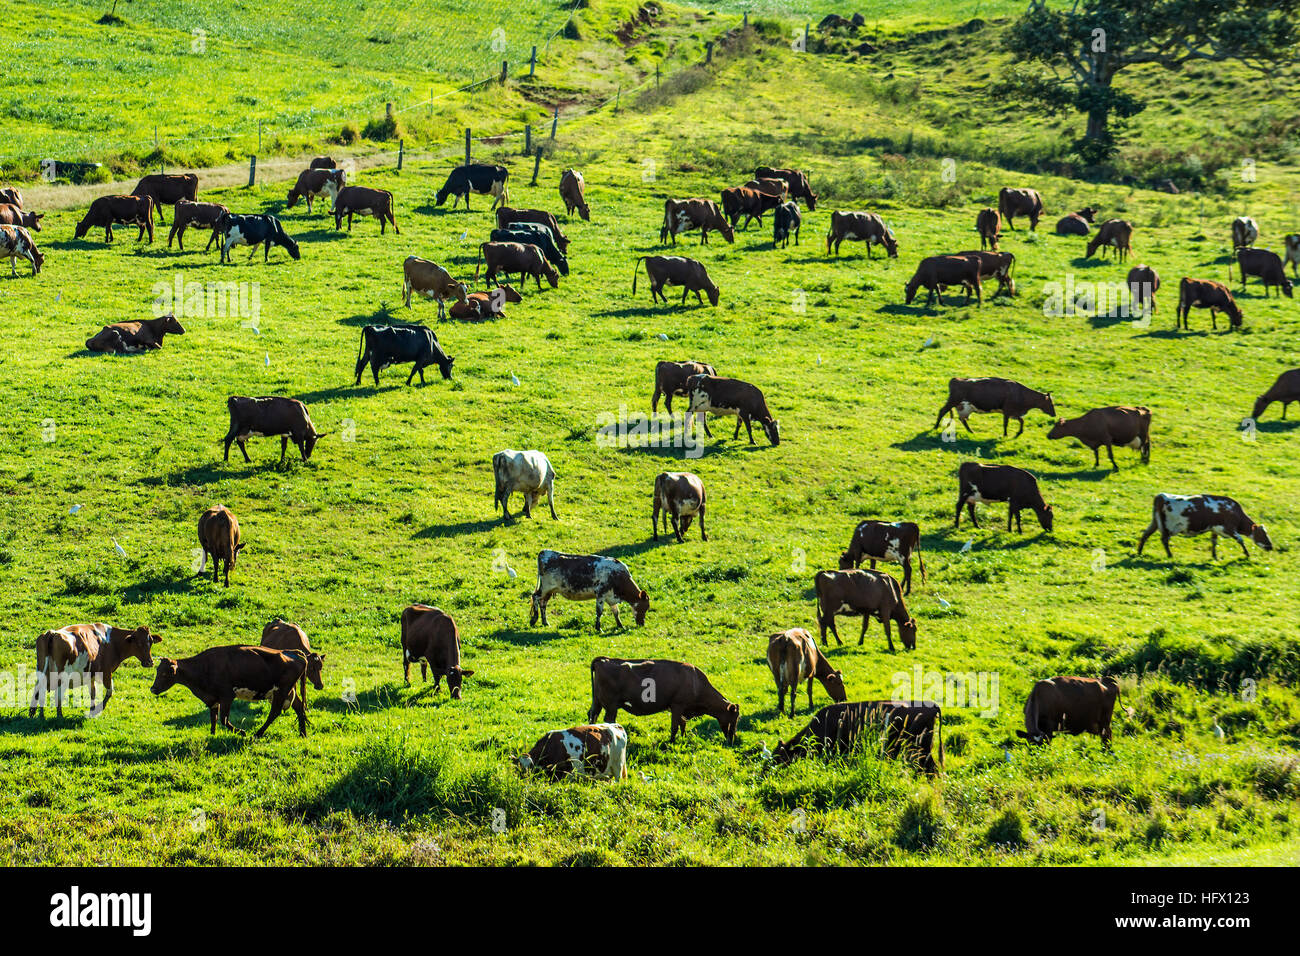 Cows graze in a paddock Stock Photo